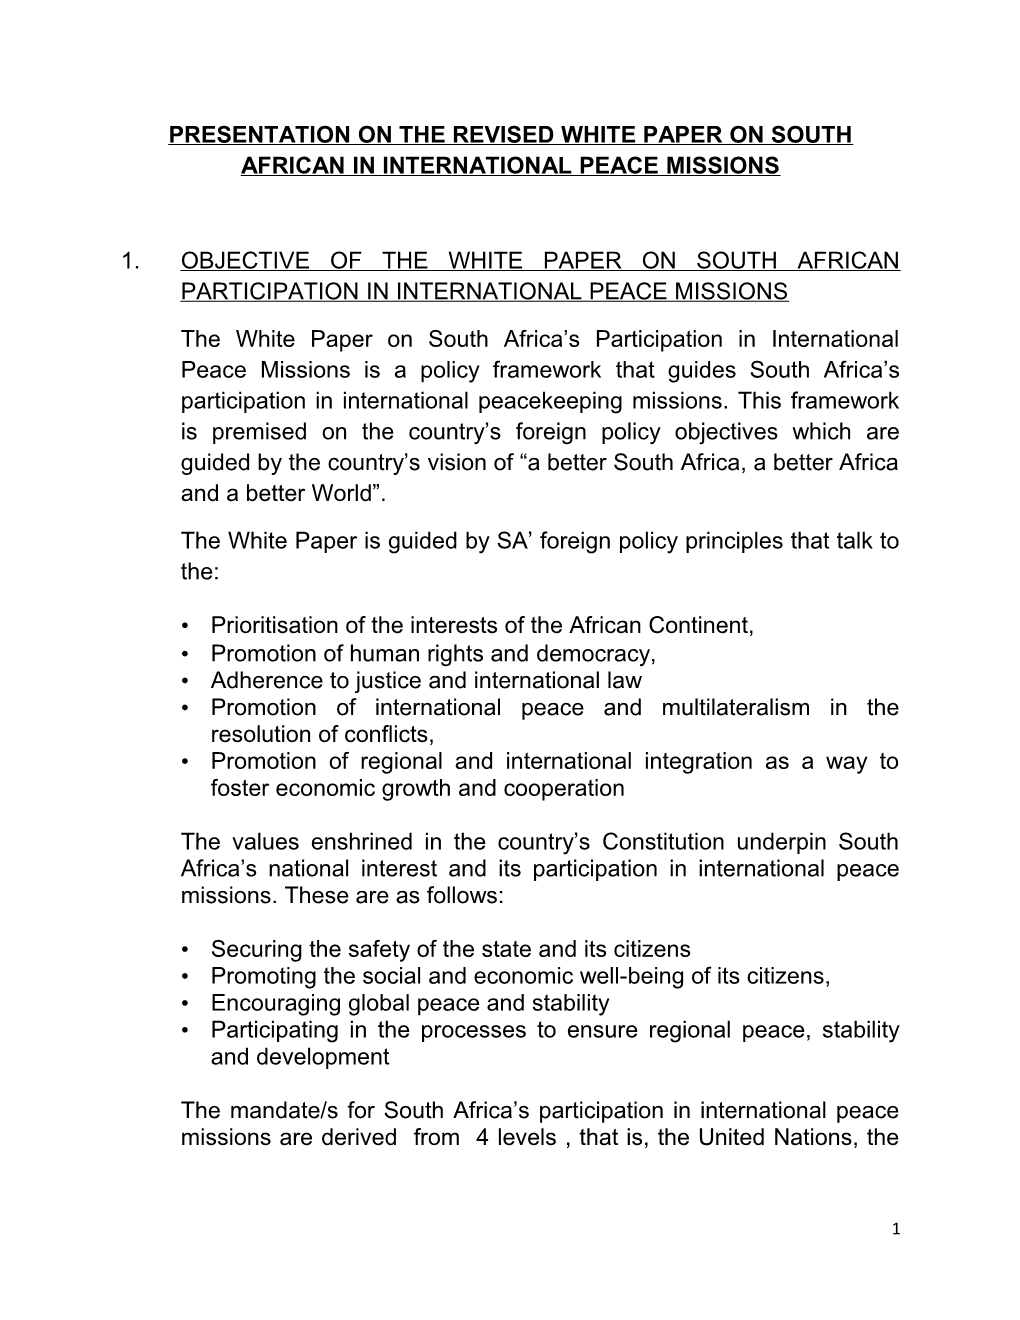 Presentation on the Revised White Paper on South African in International Peace Missions